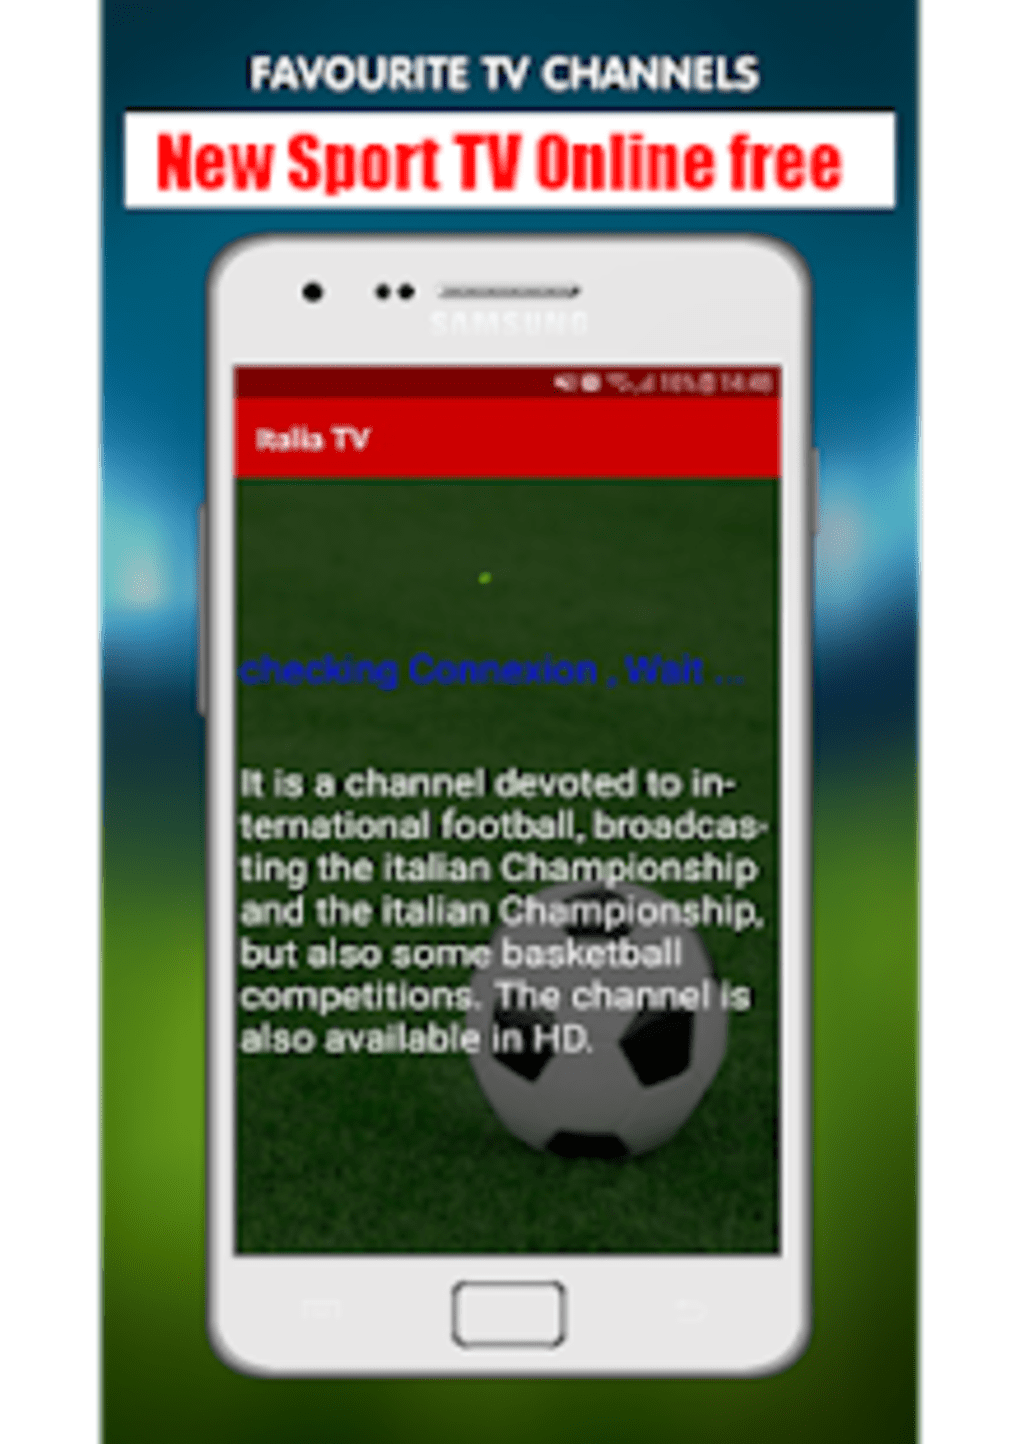 Italia TV Live - All free TV channels for Android